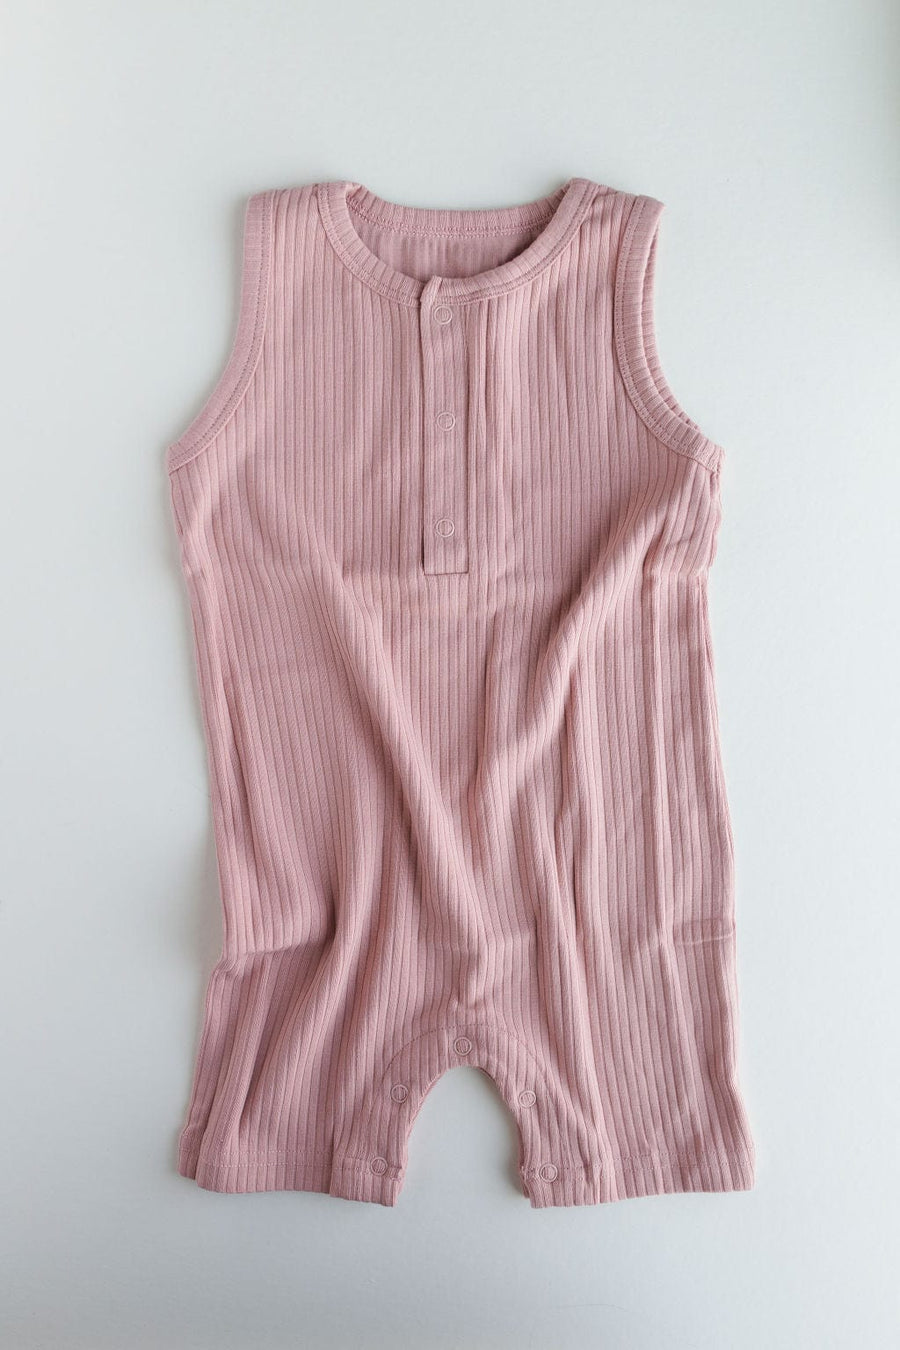 Narzbaby Bodysuit Pale Pink / 0-3 MO Armless Ribbed Romper